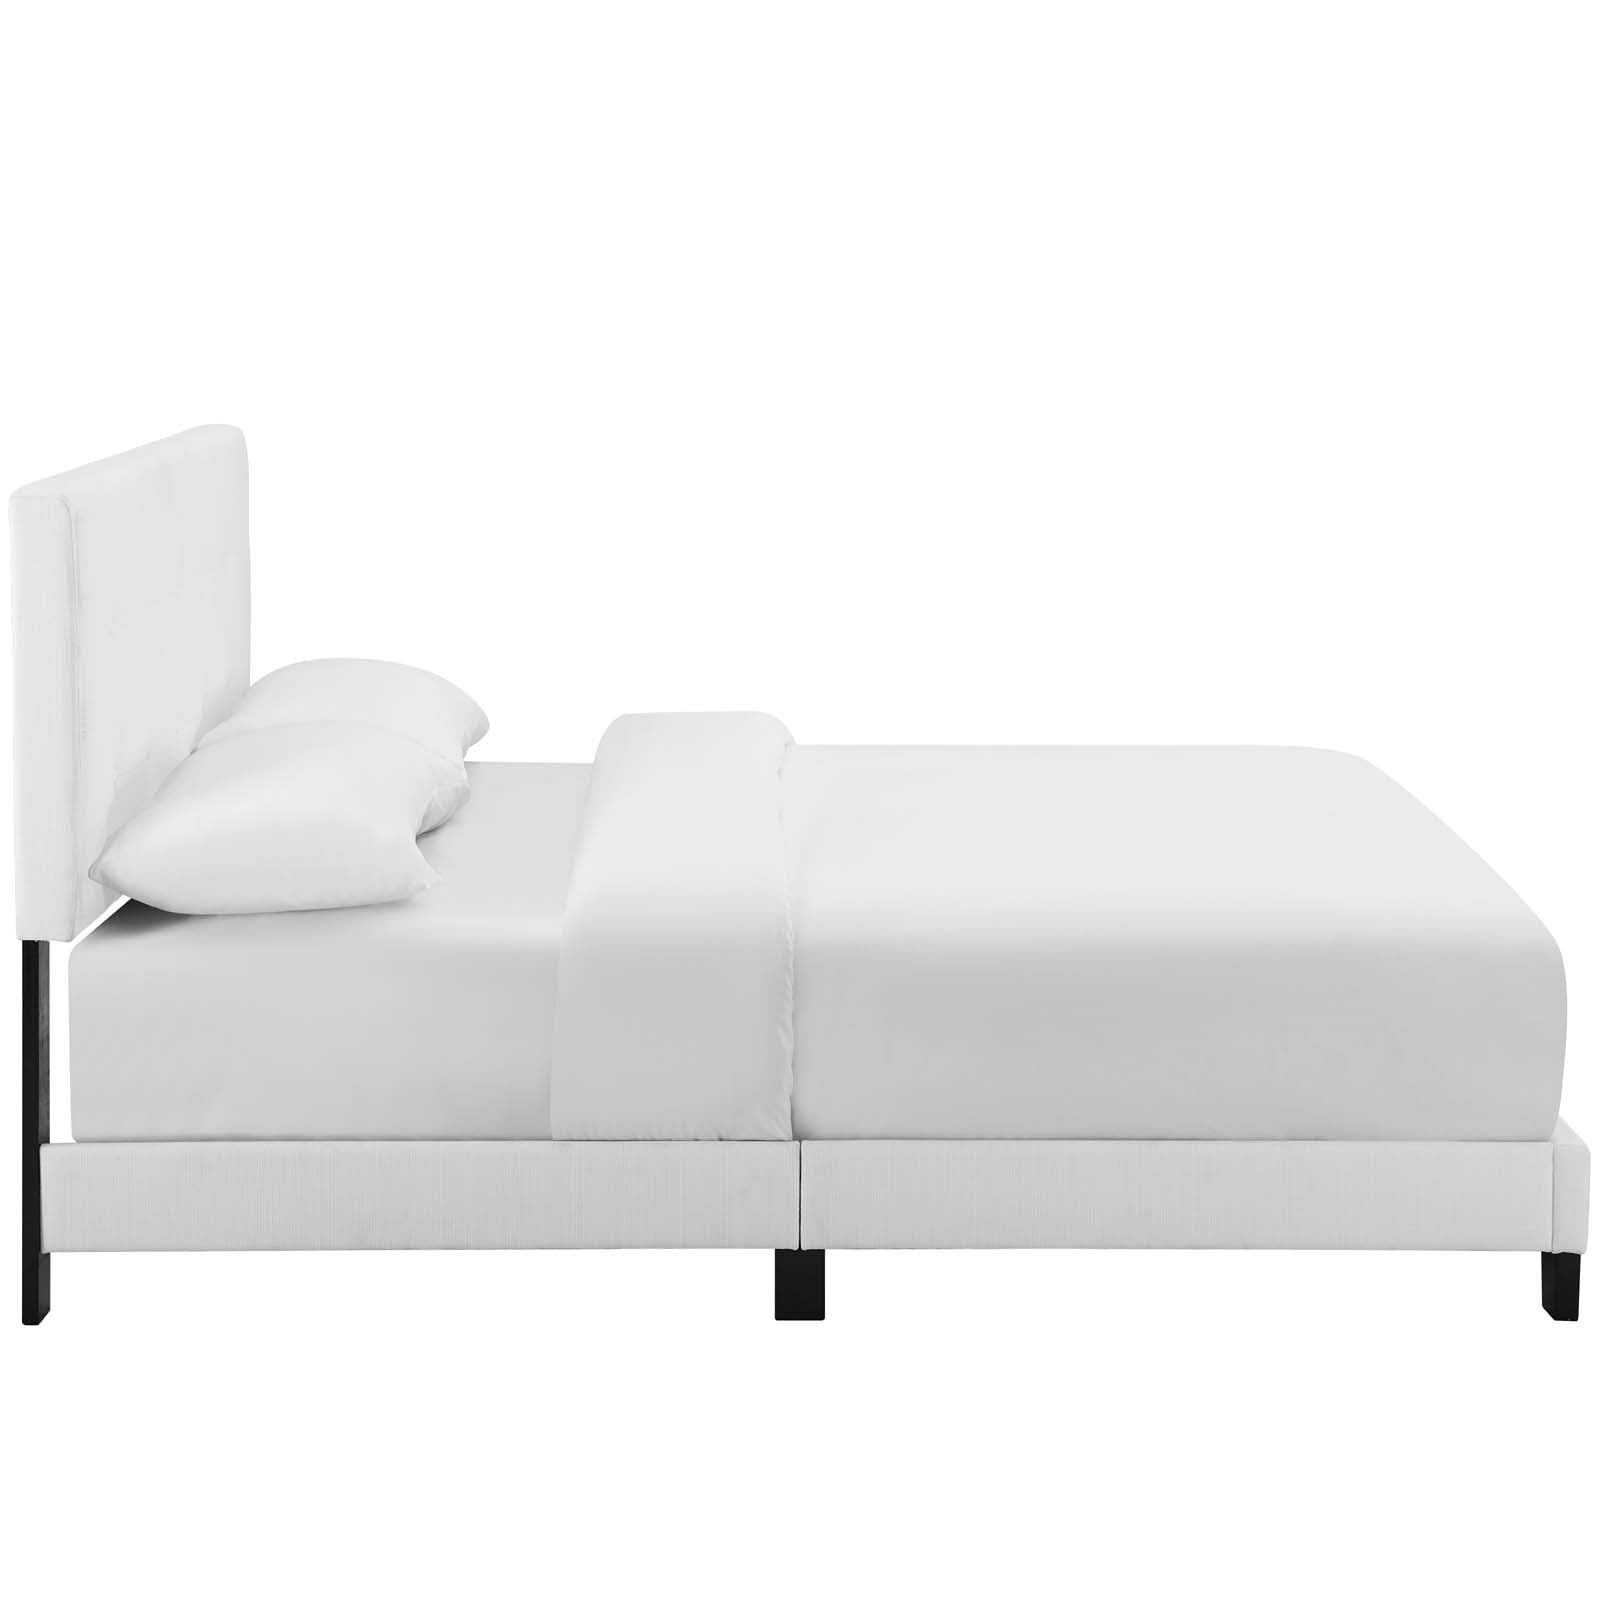 Modway Beds - Melanie Twin Tufted Button Upholstered Fabric Platform Bed White